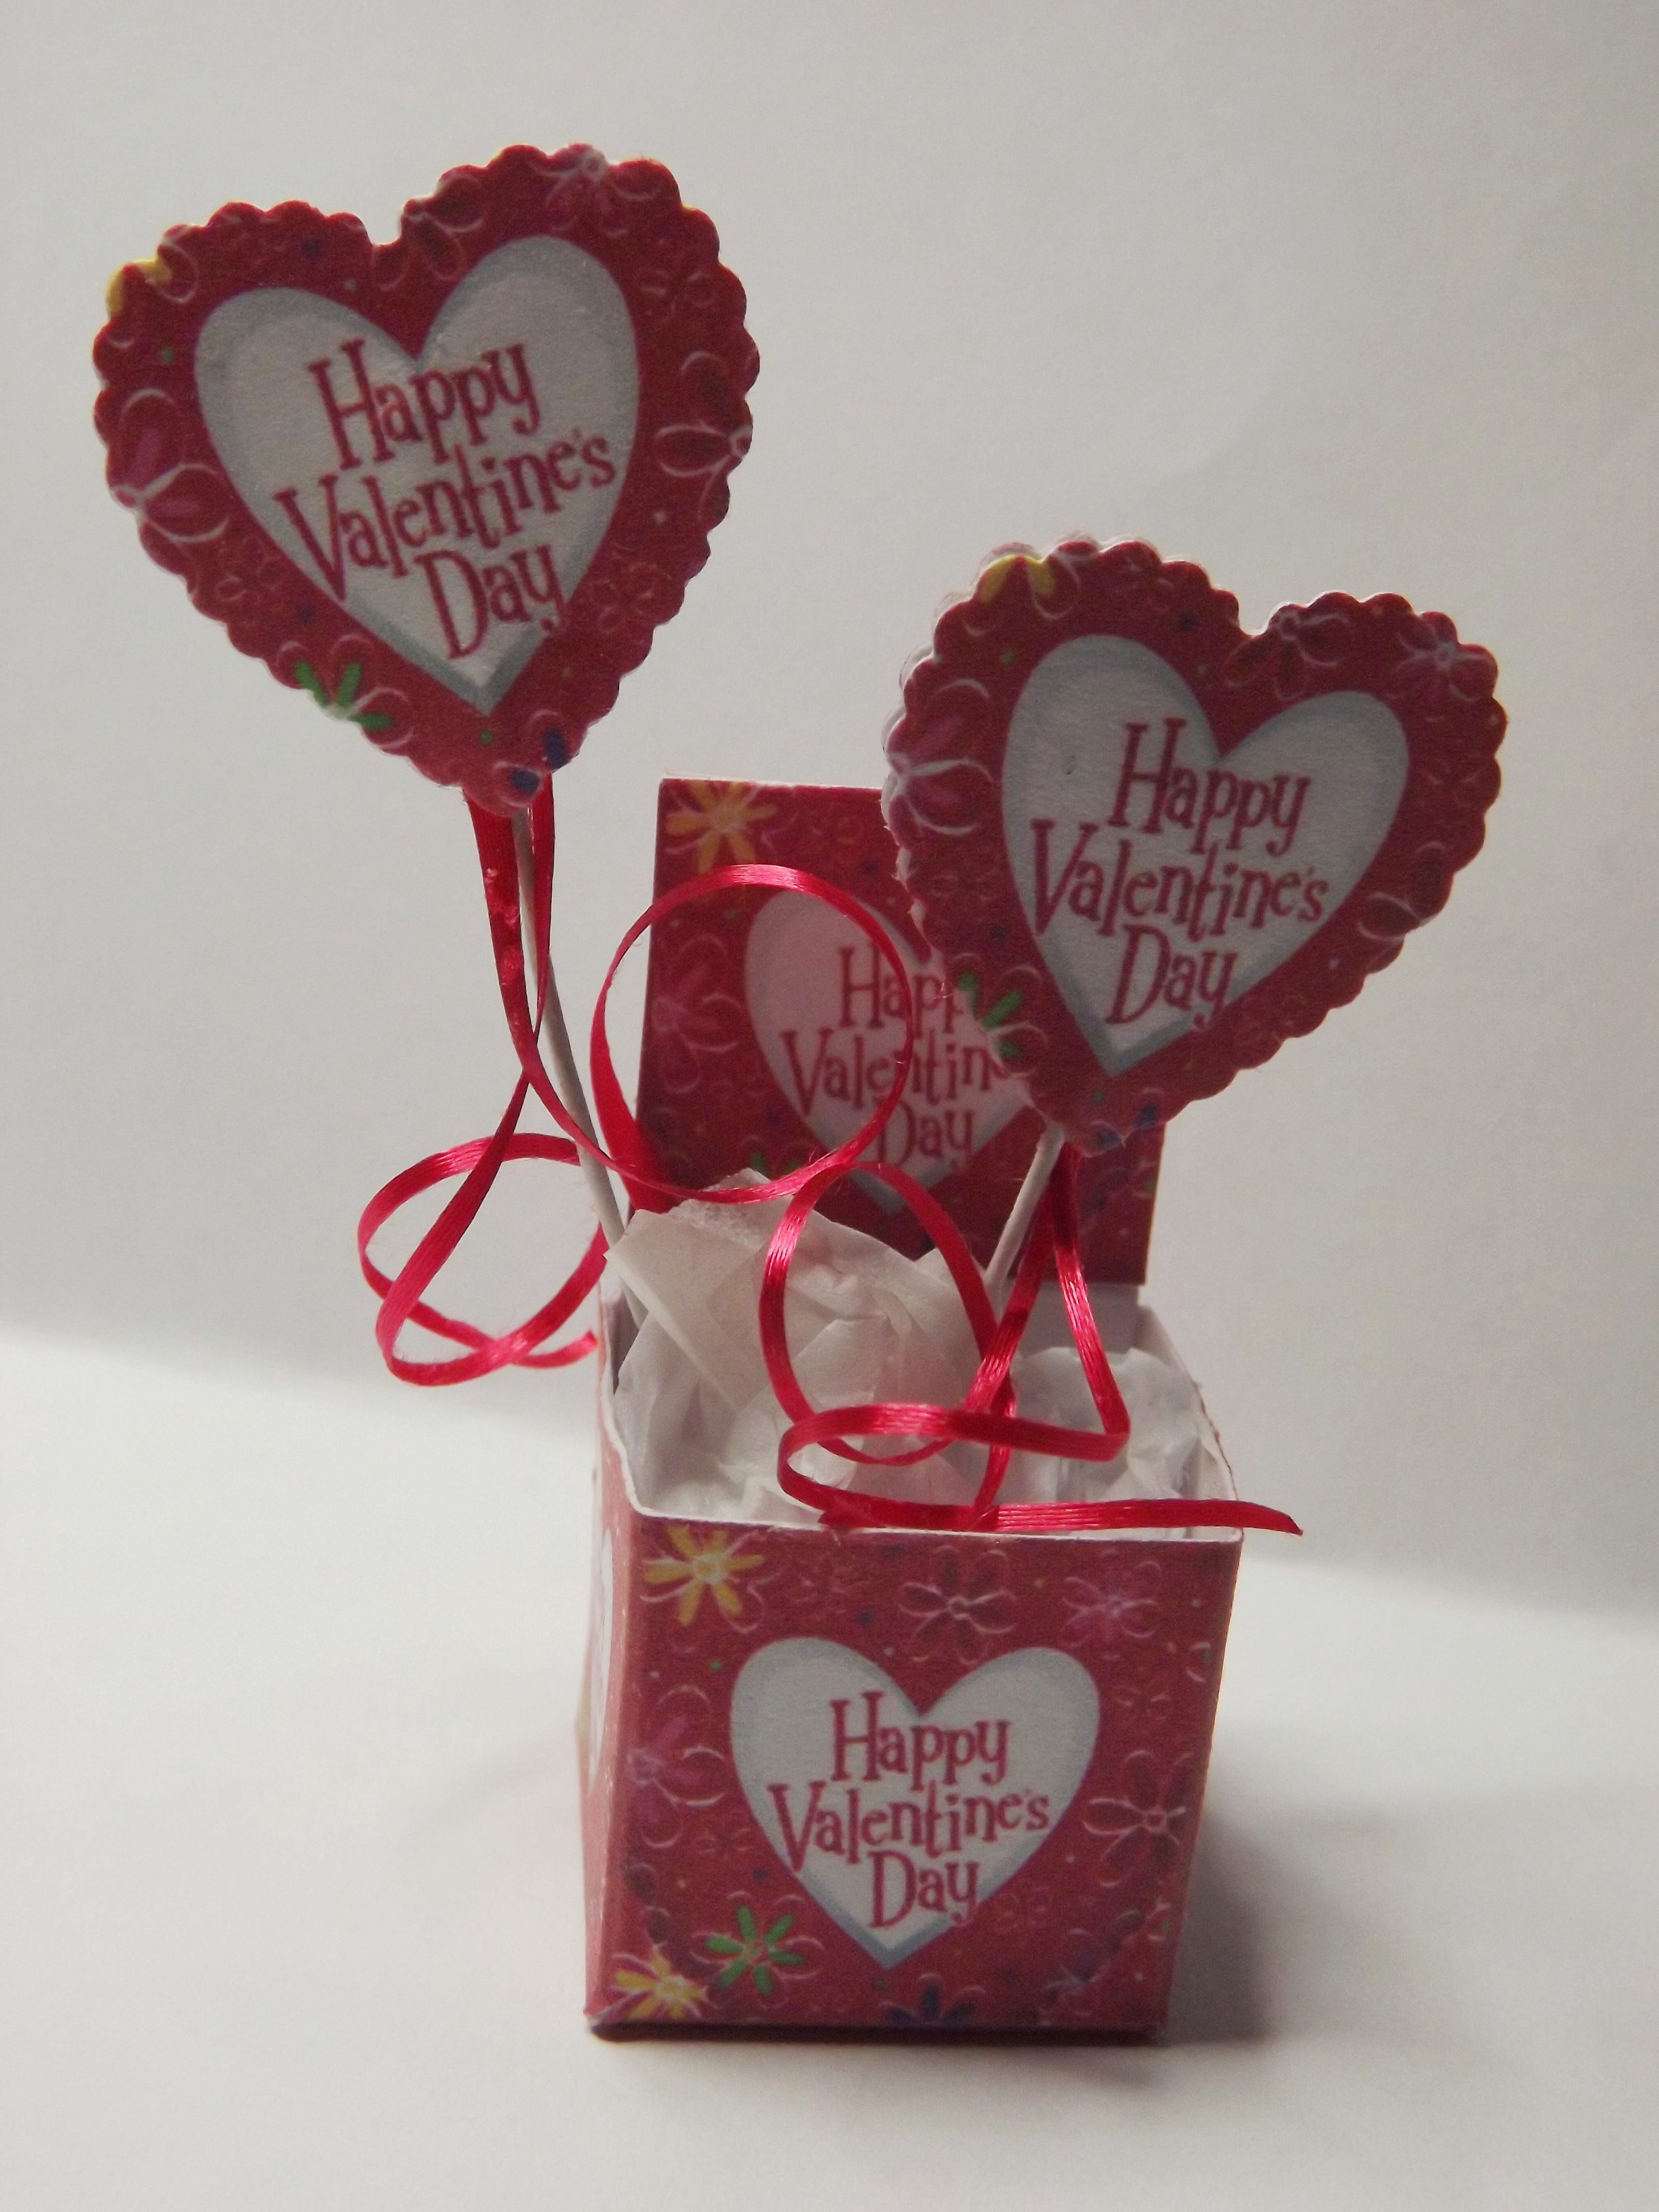 DOLLS HOUSE VALENTINES BALLOON IN A BOX KIT